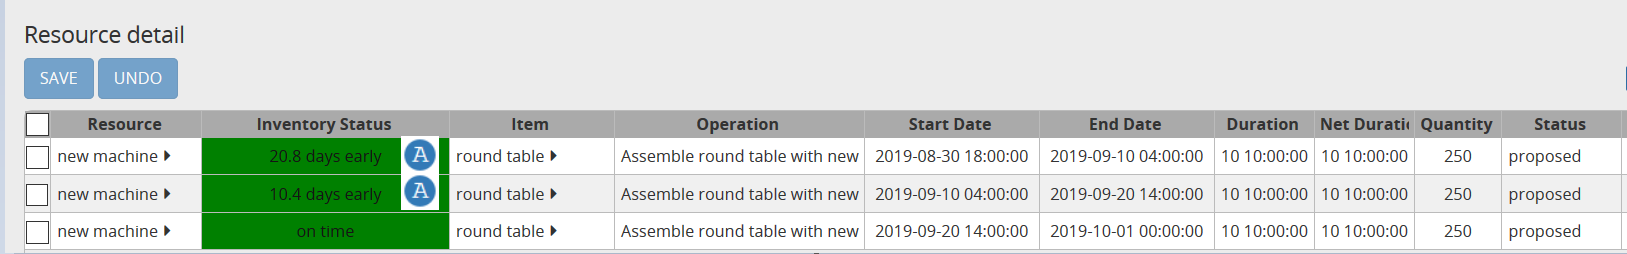 Resource detail for round table